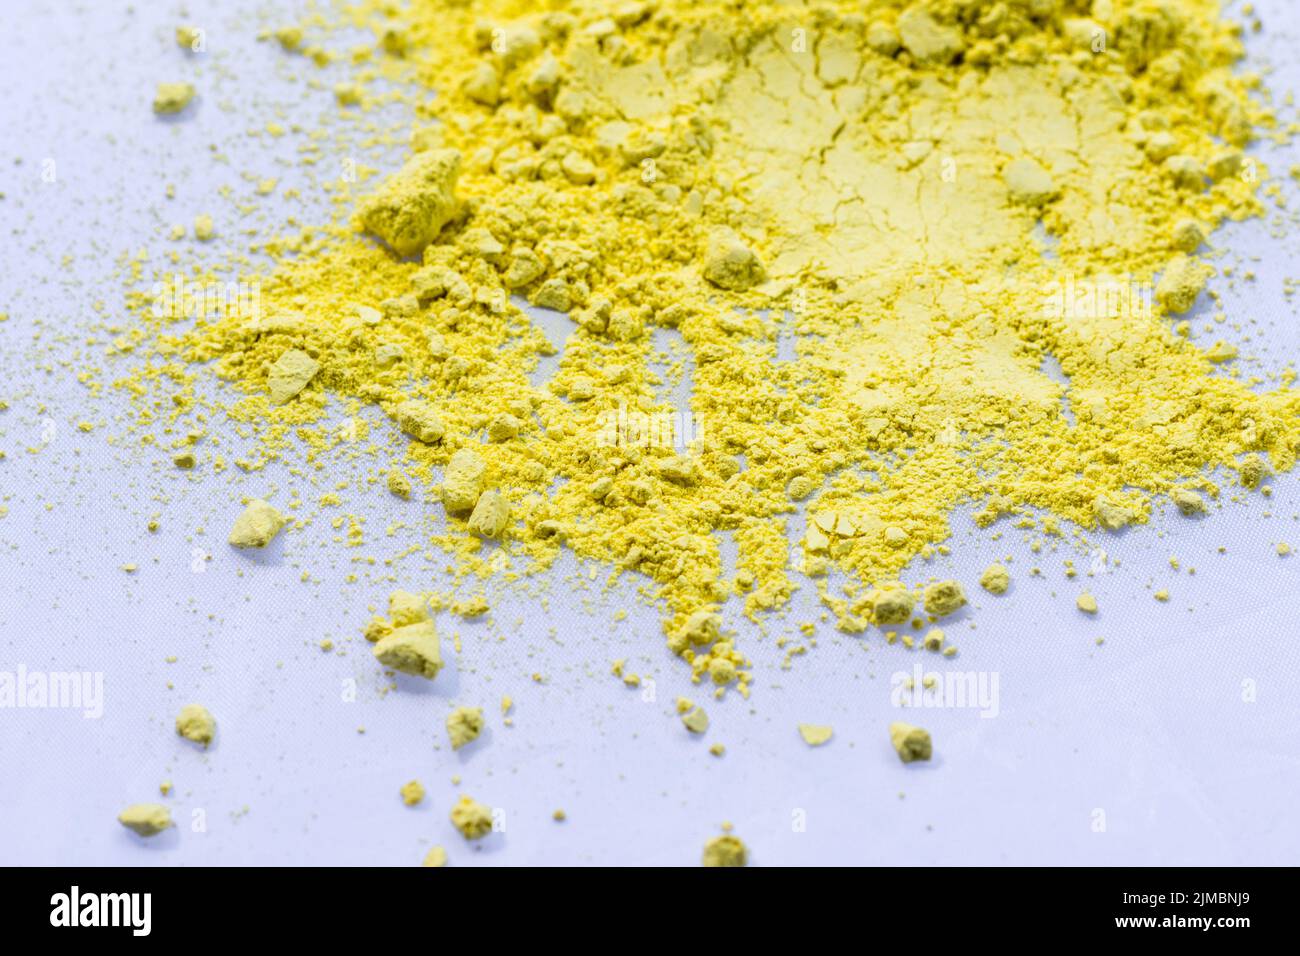 Yellow color background of chalk powder. Yellow color dust particles splattered on white background. Stock Photo